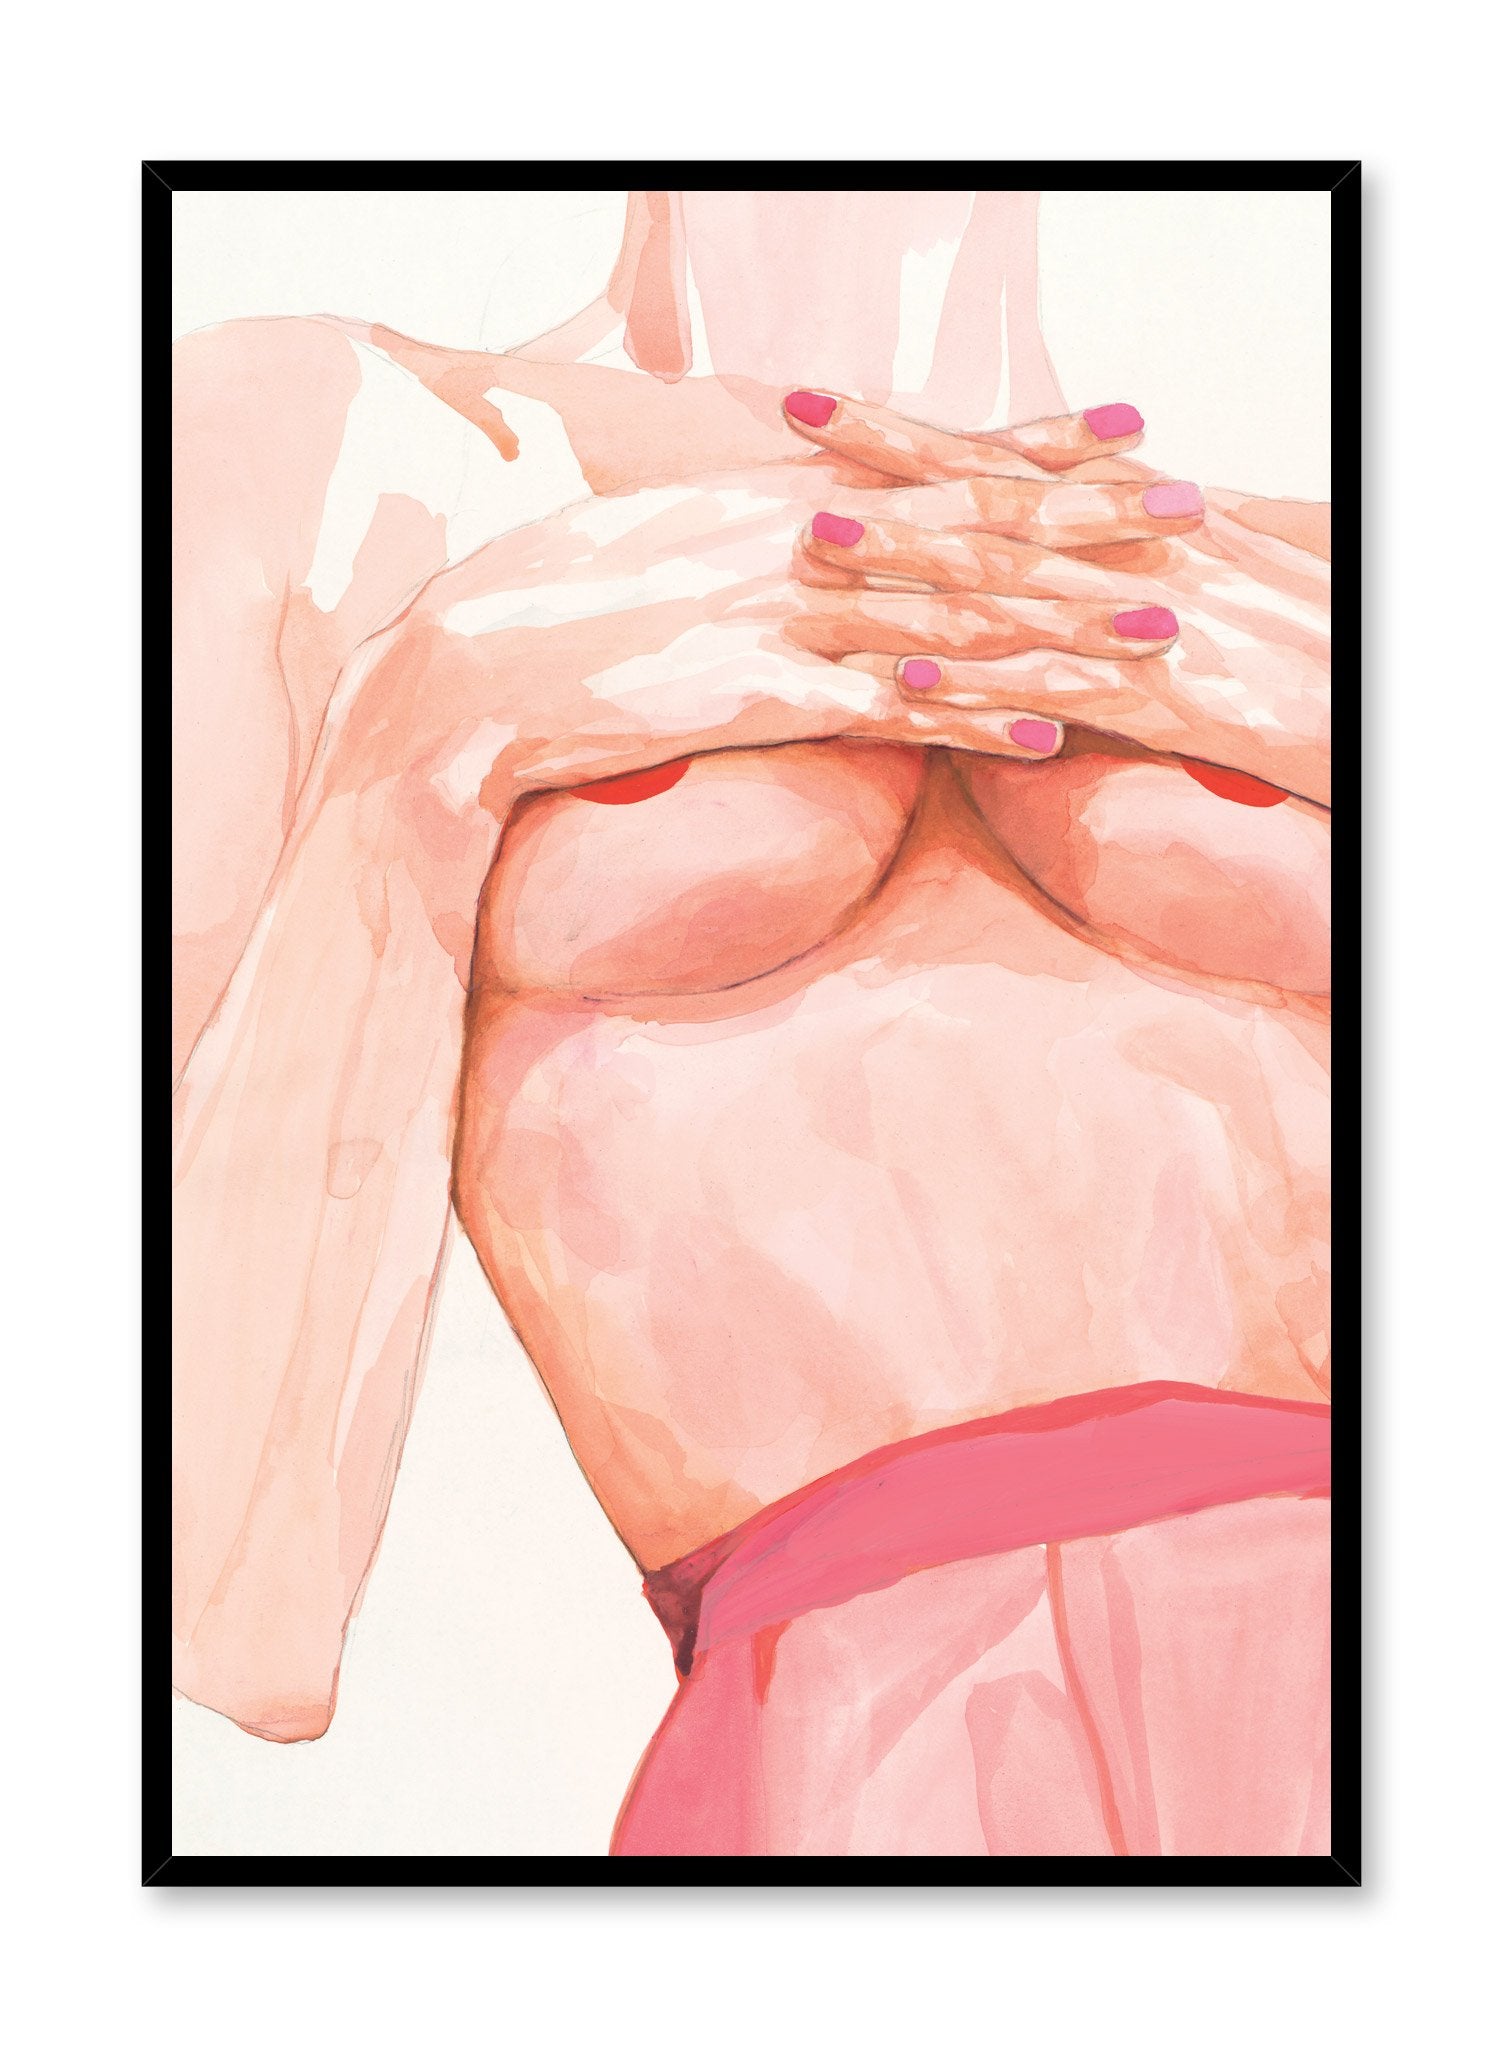 Fashion illustration poster by Opposite Wall with naked woman watercolour